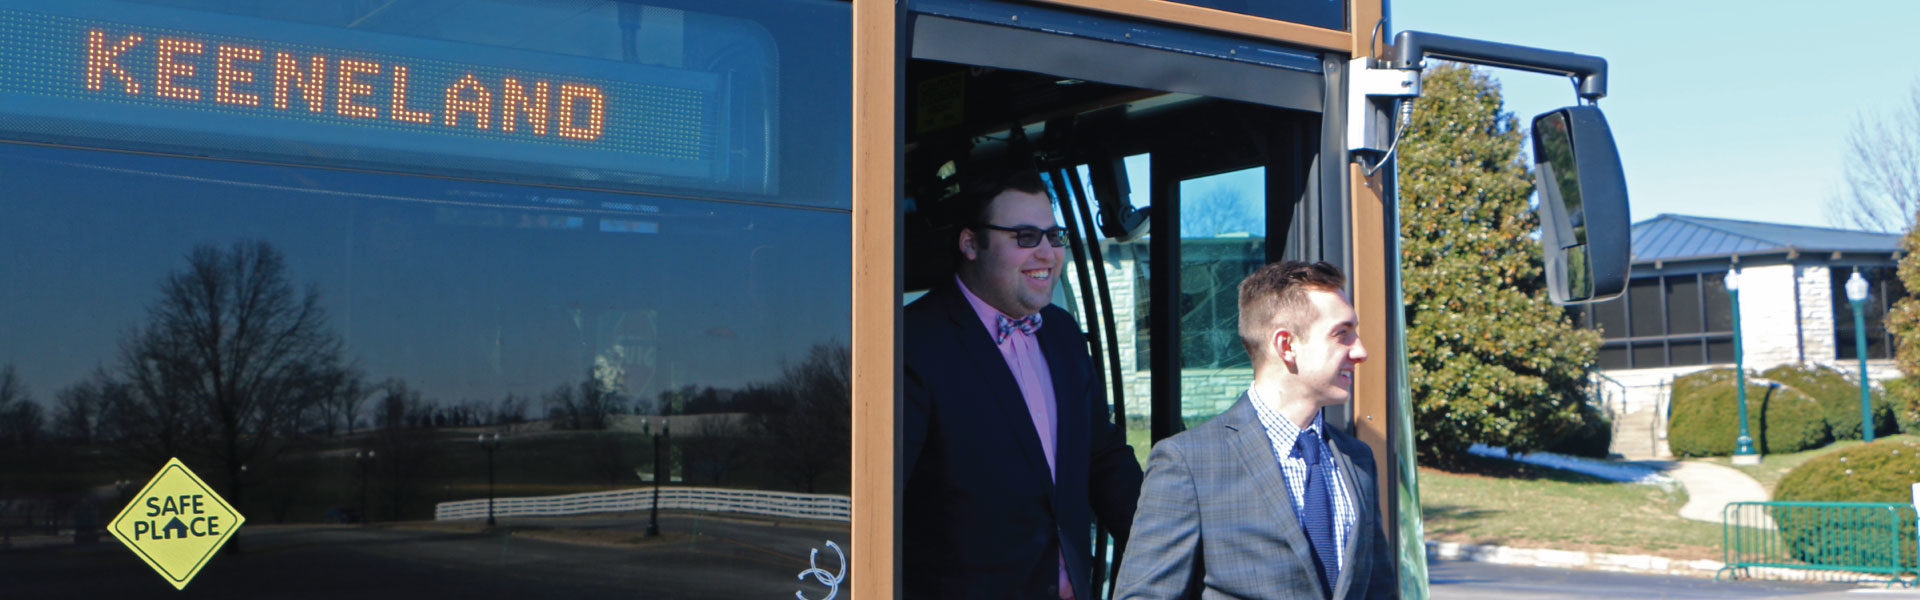 Riders exiting Keeneland shuttle